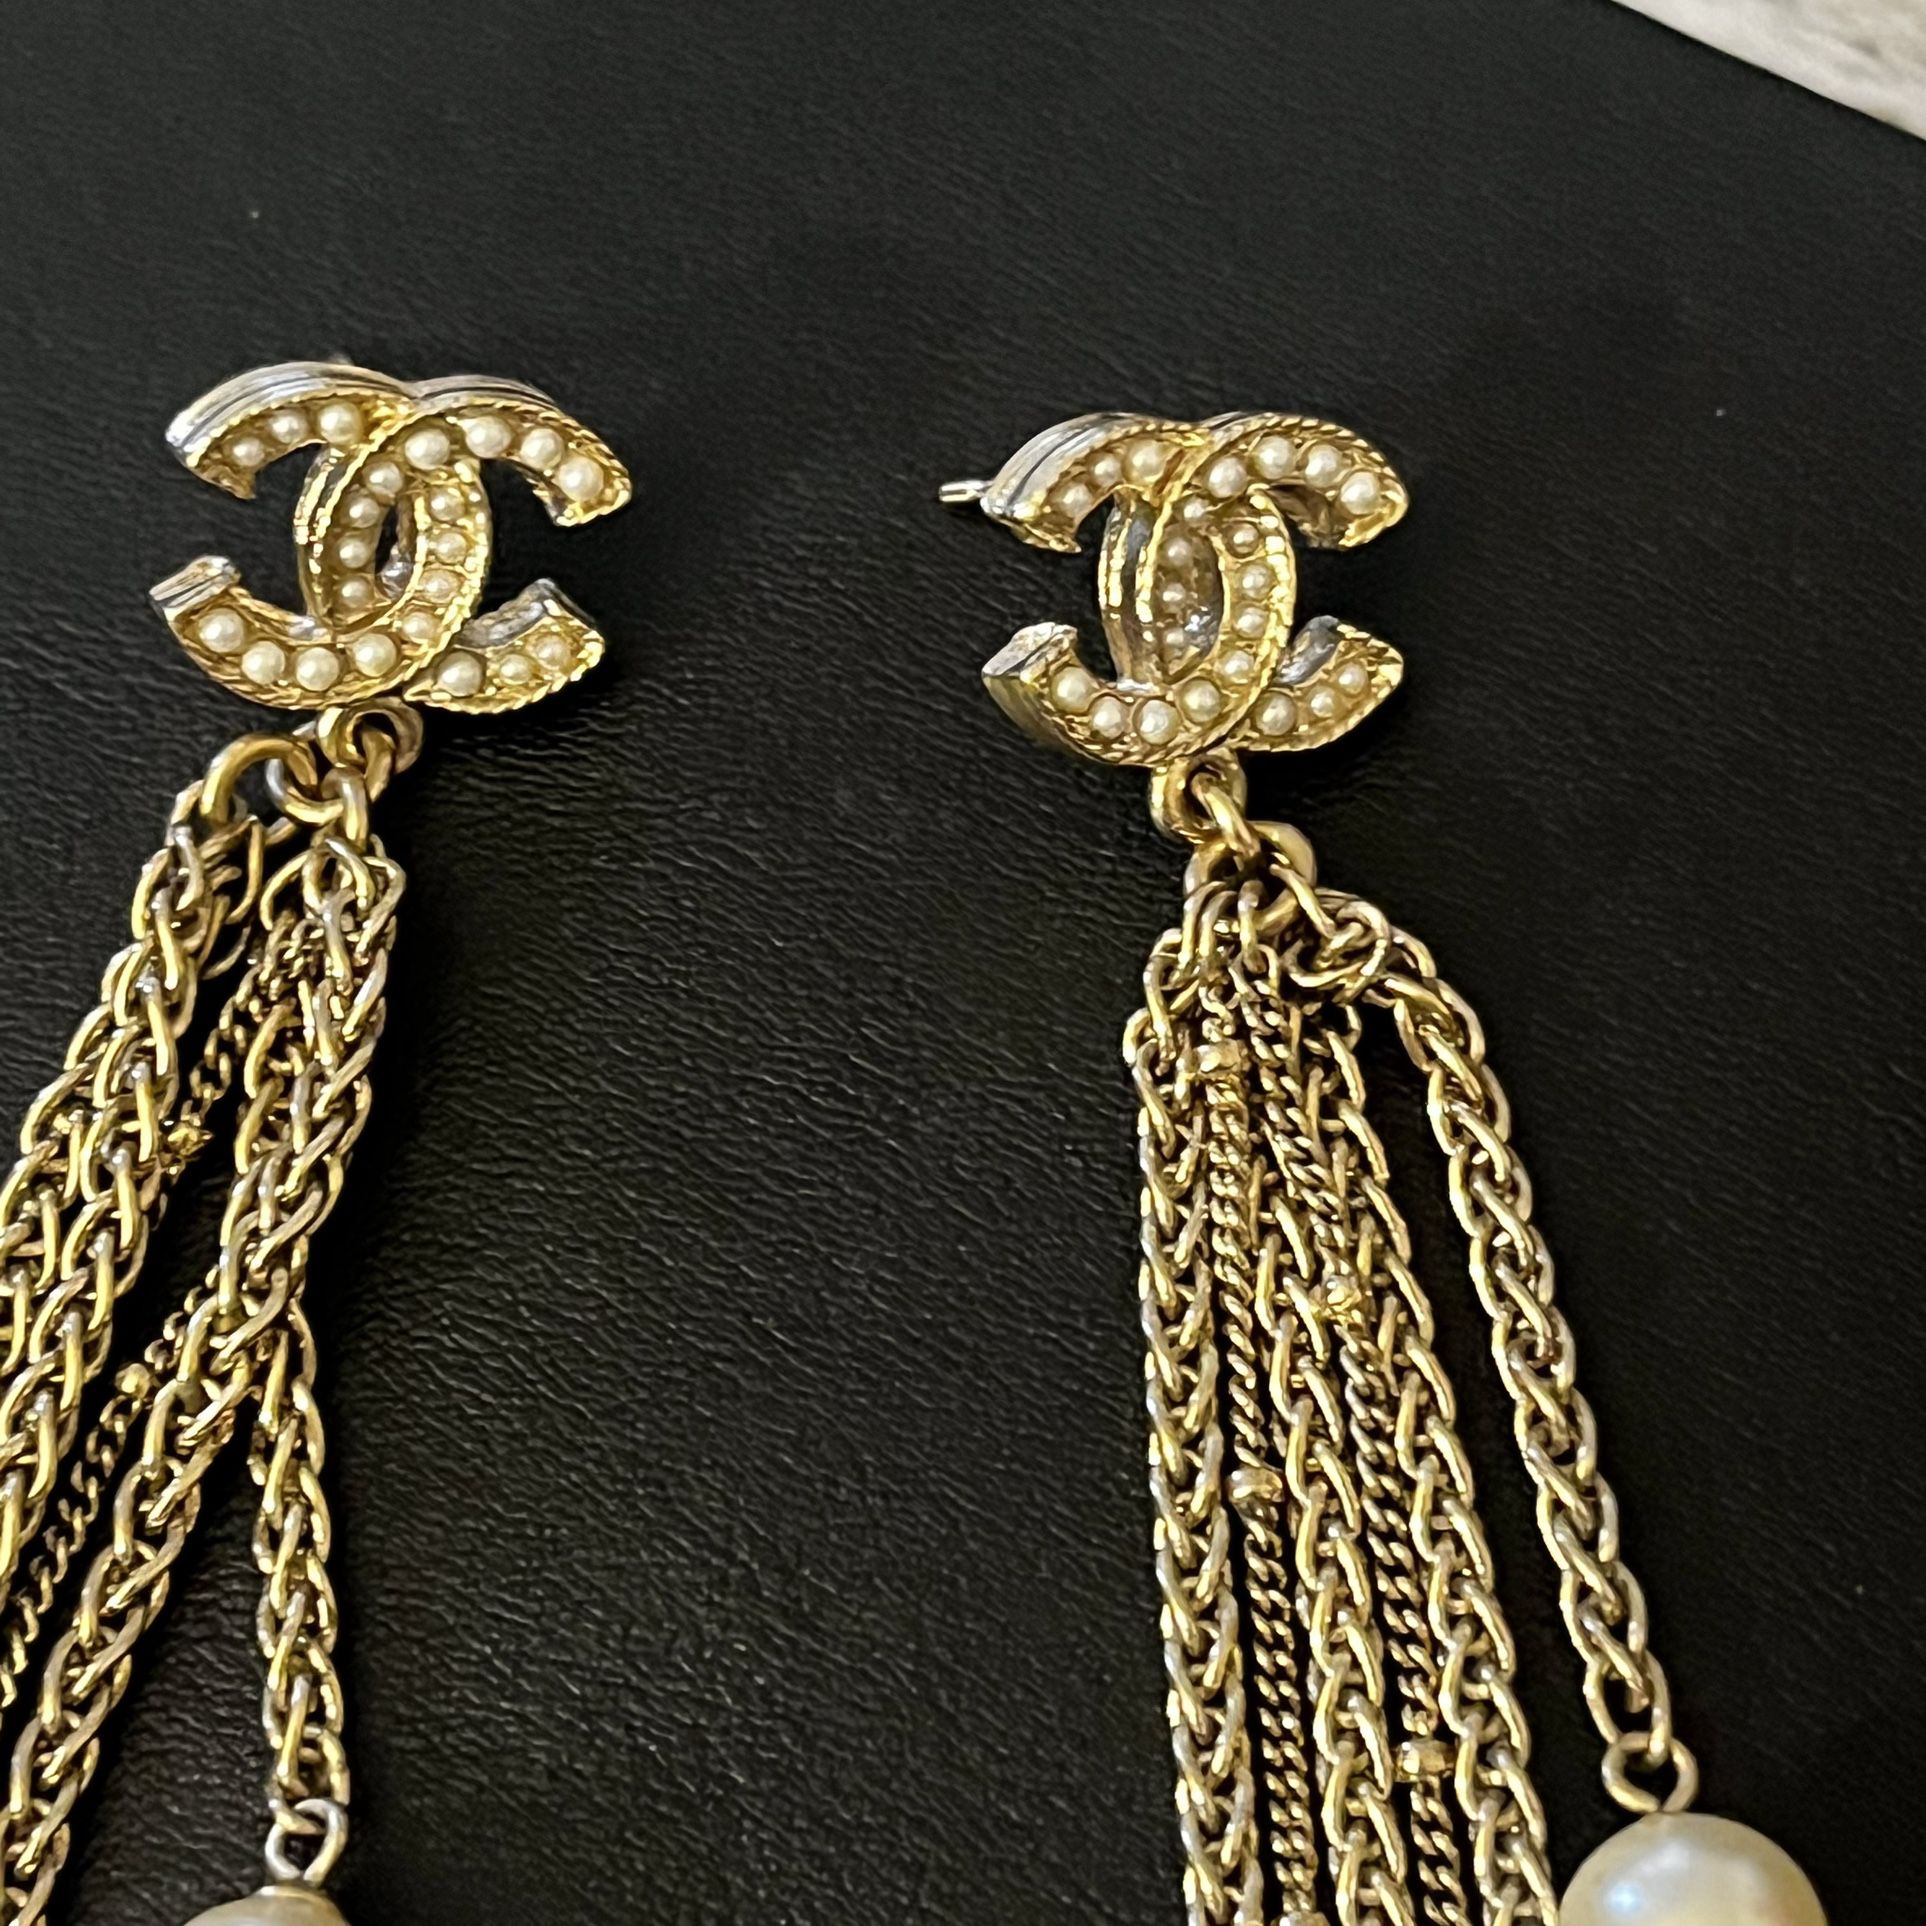 REDUCED! $500 Each Chanel Earrings Authentic! for Sale in Redwood City, CA  - OfferUp